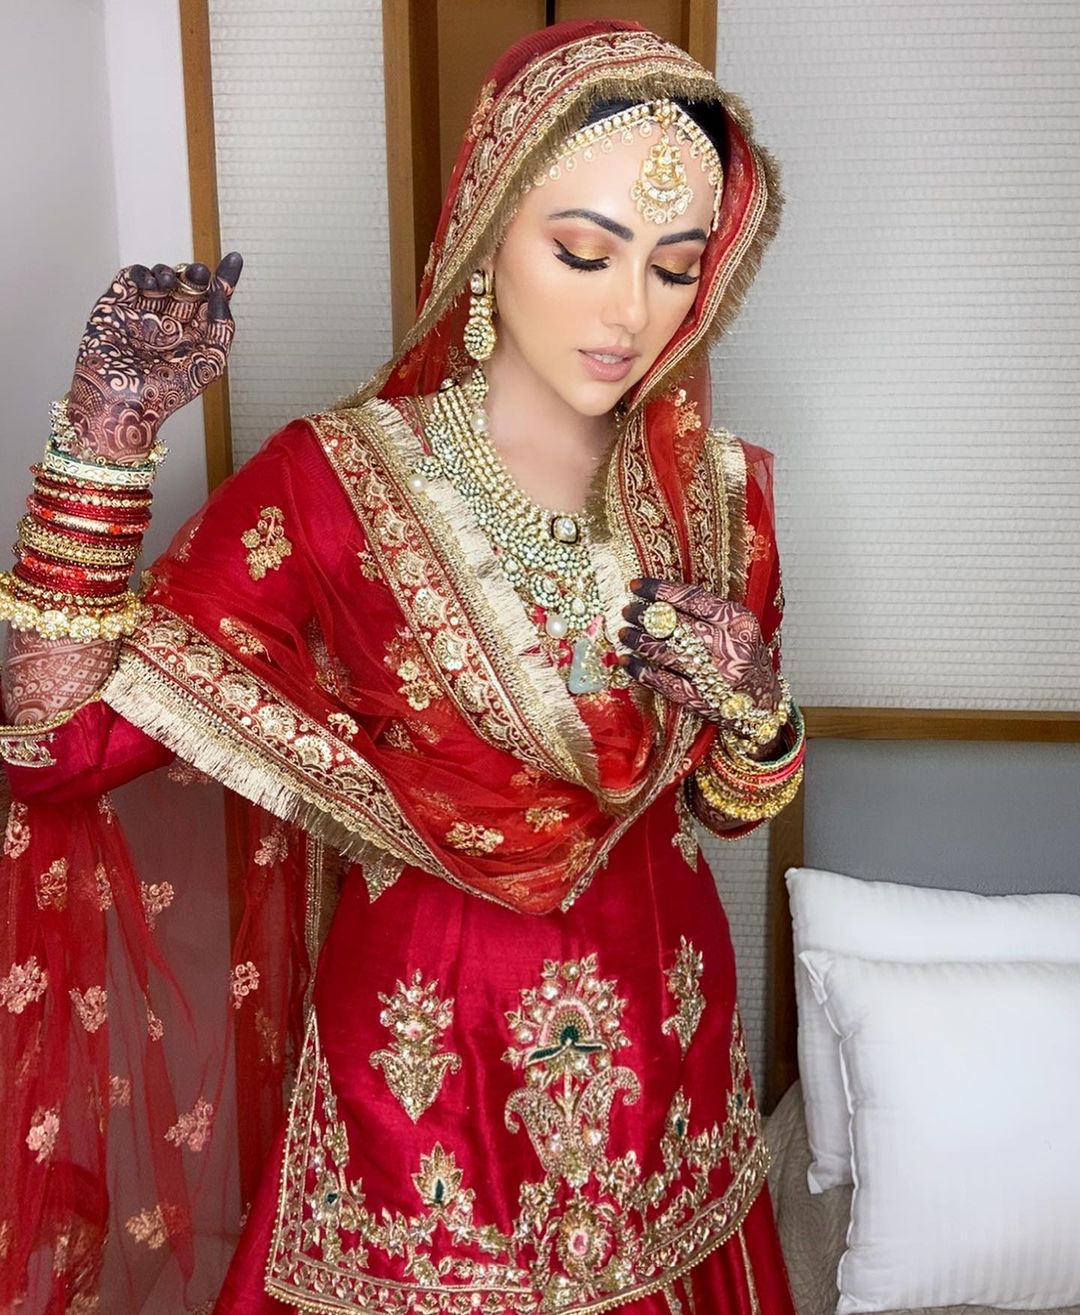 More pictures from Sana Khan Anas Sayed wedding